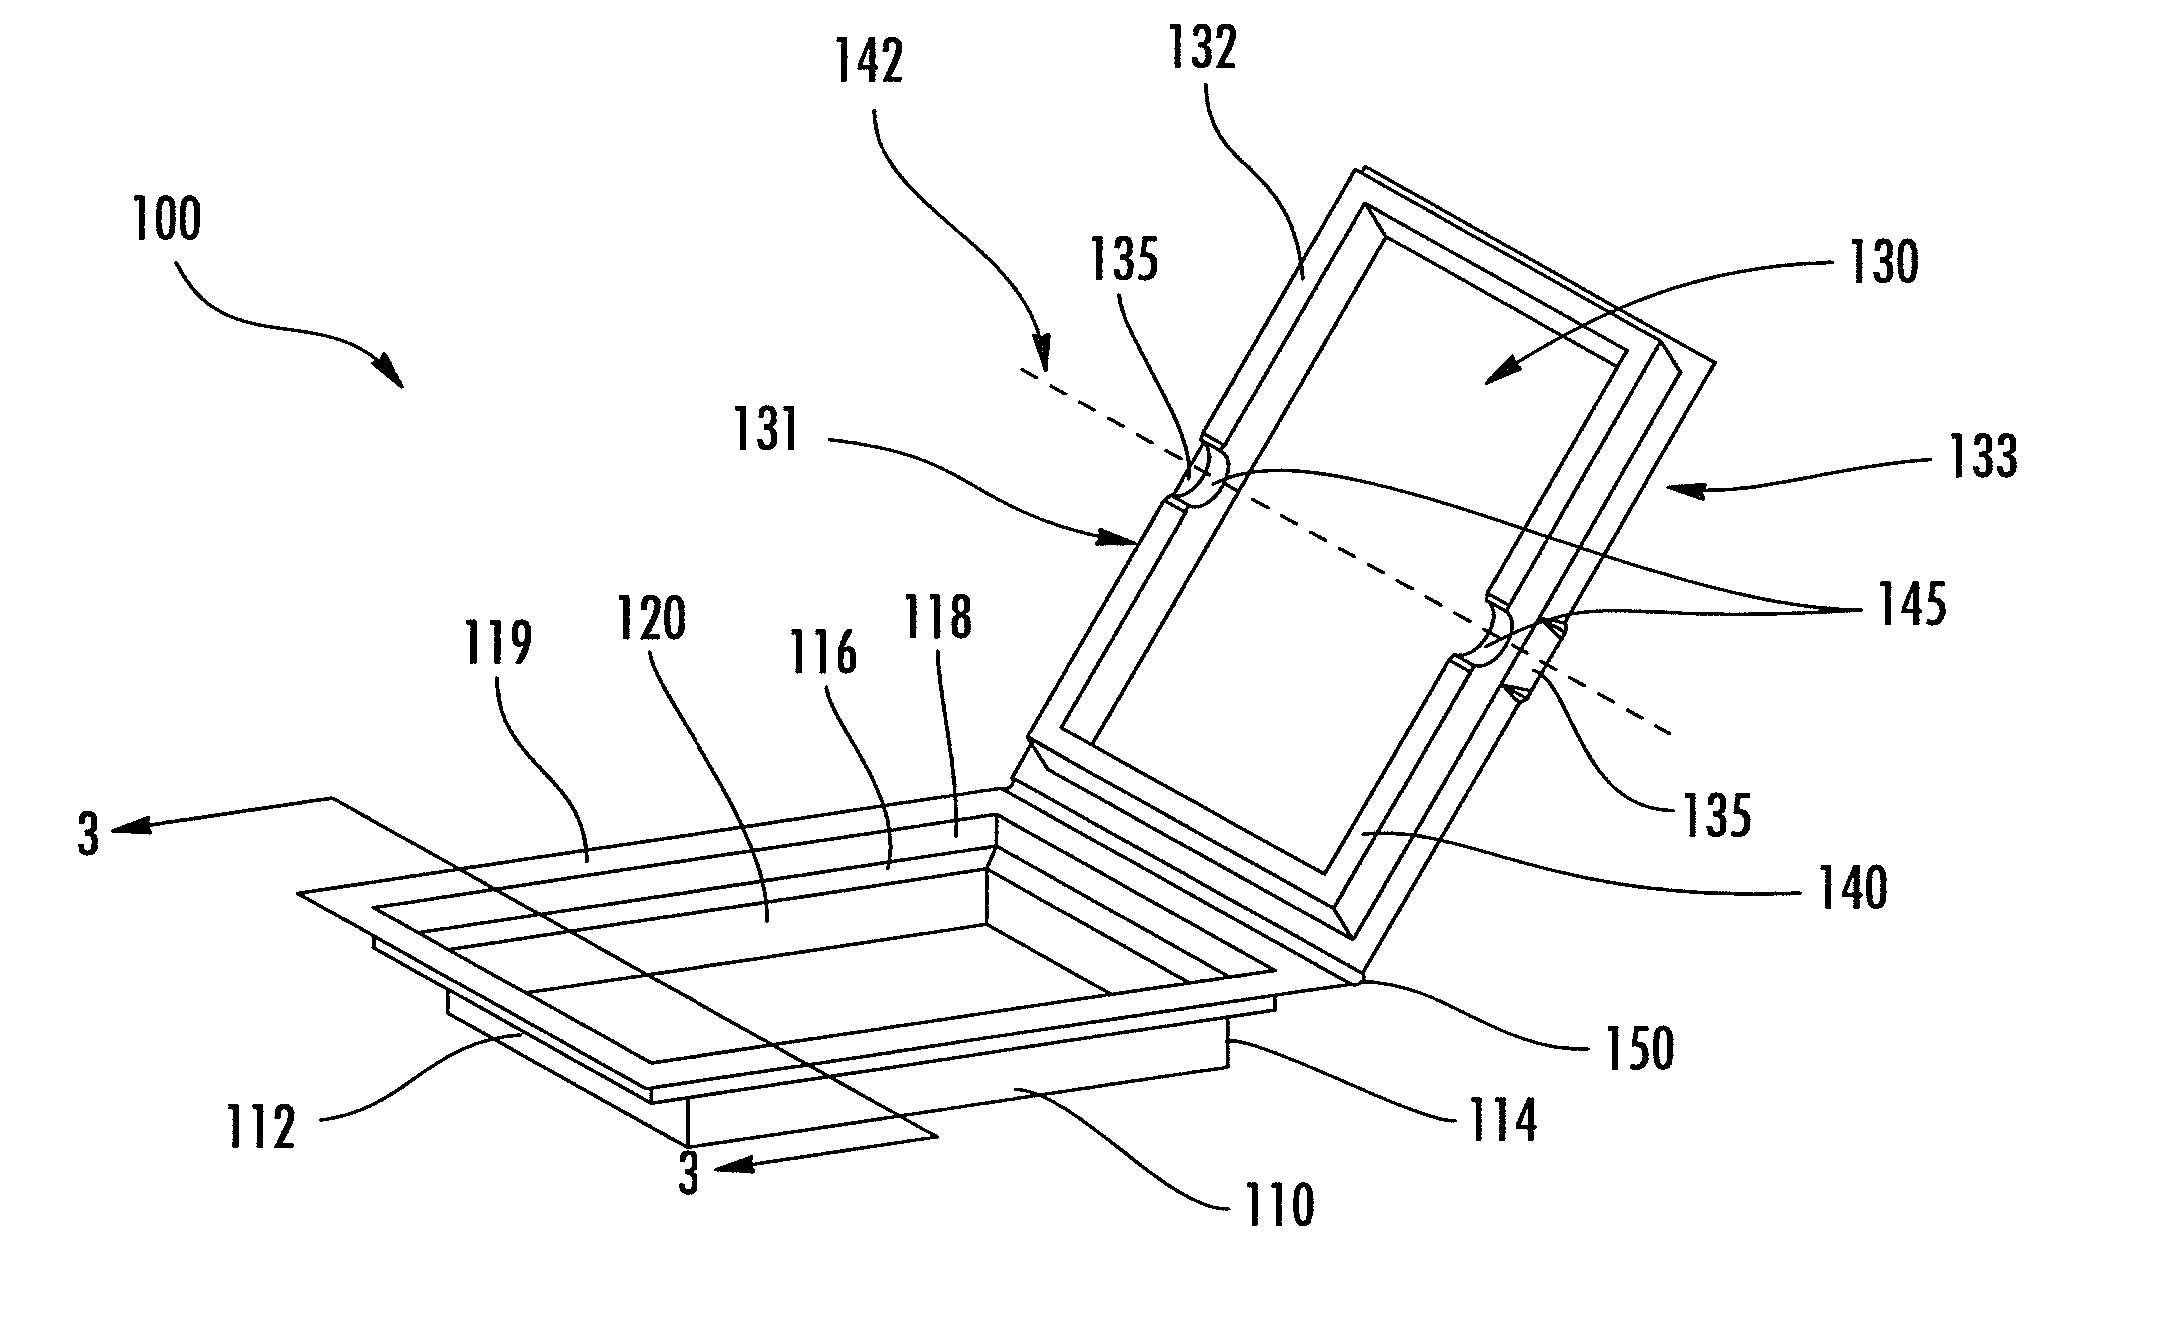 Buckling clamshell container for automated aliquot and dispersal processes